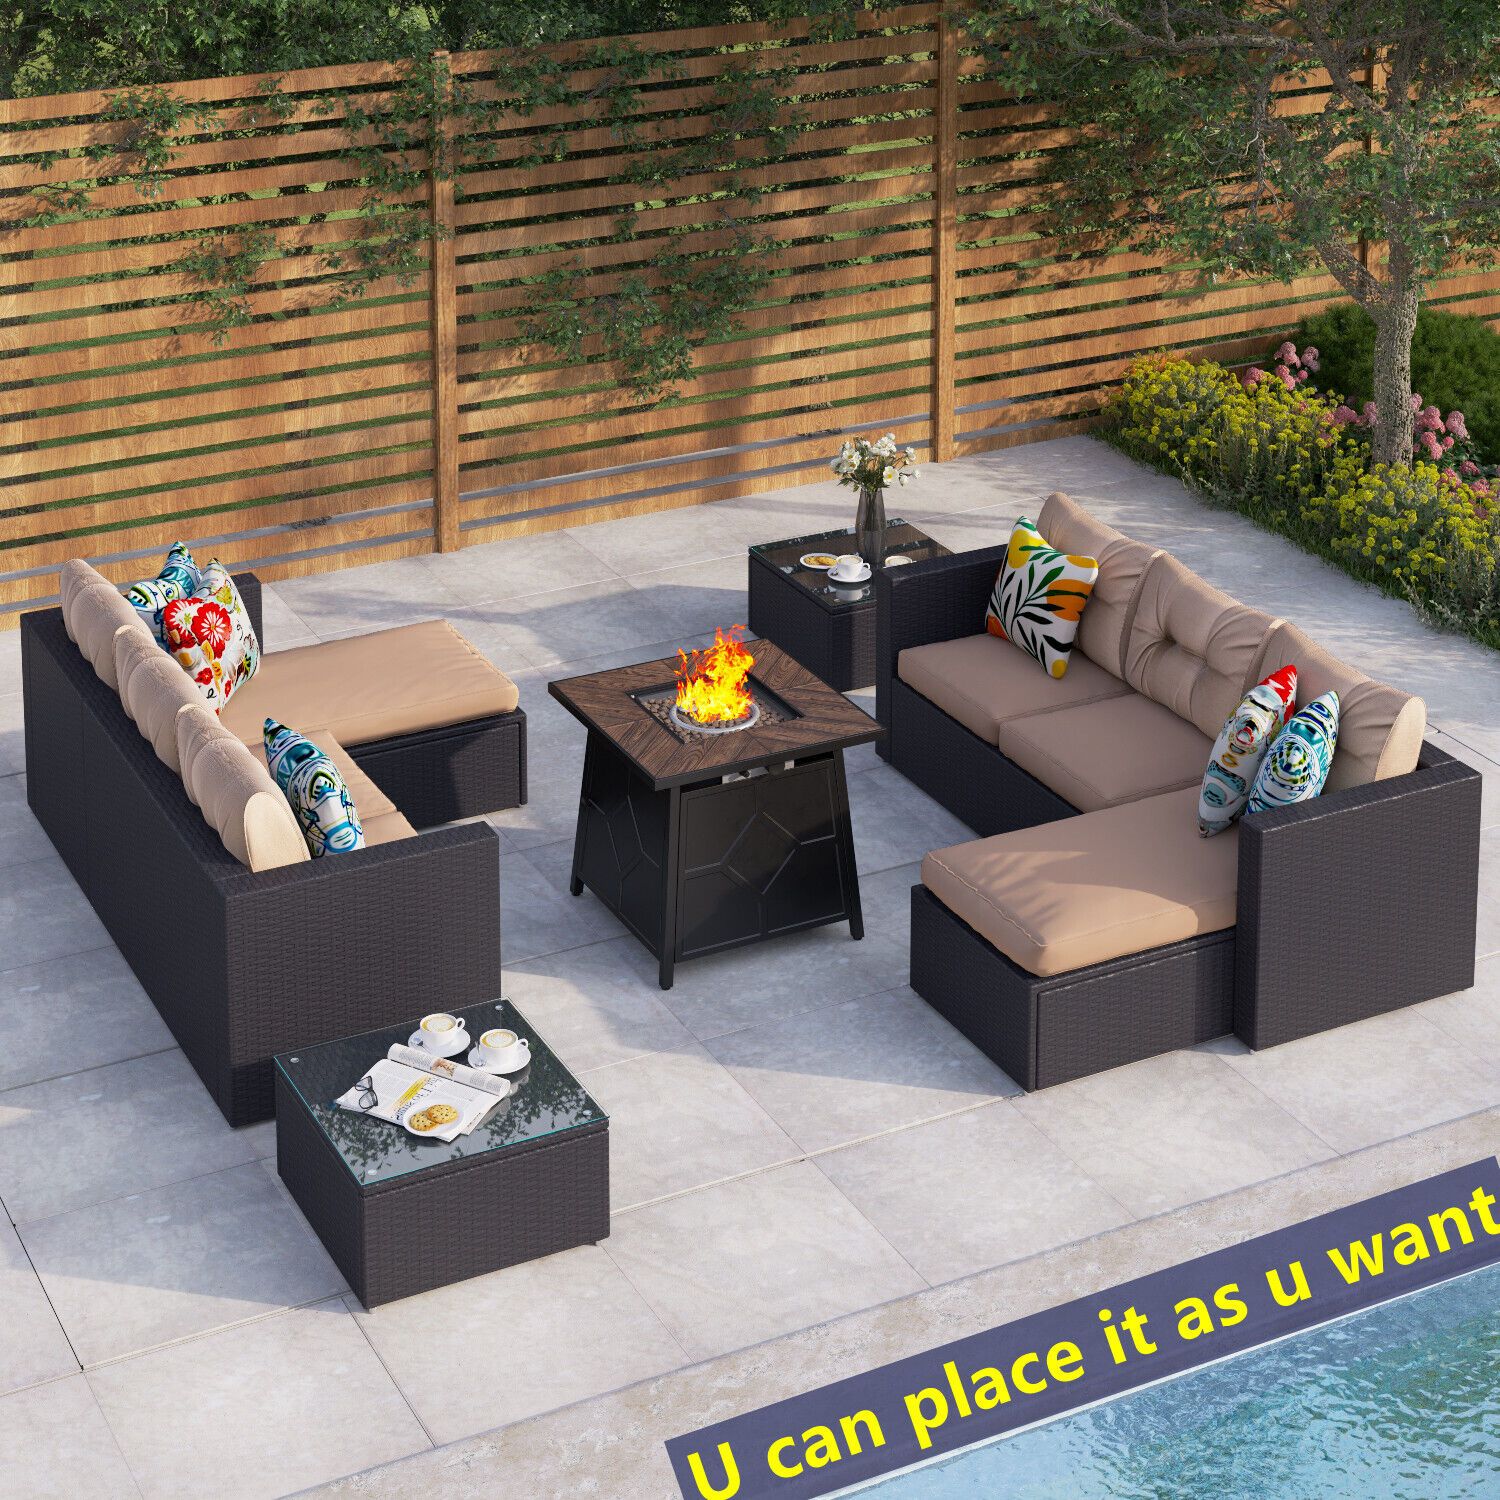 Outdoor Rattan Sectional Sofa Set With Gas Fire Pit Table Patio Wicker  Furniture 670724078205 | Ebay With Regard To Fire Pit Table Wicker Sectional Sofa Conversation Set (View 9 of 15)